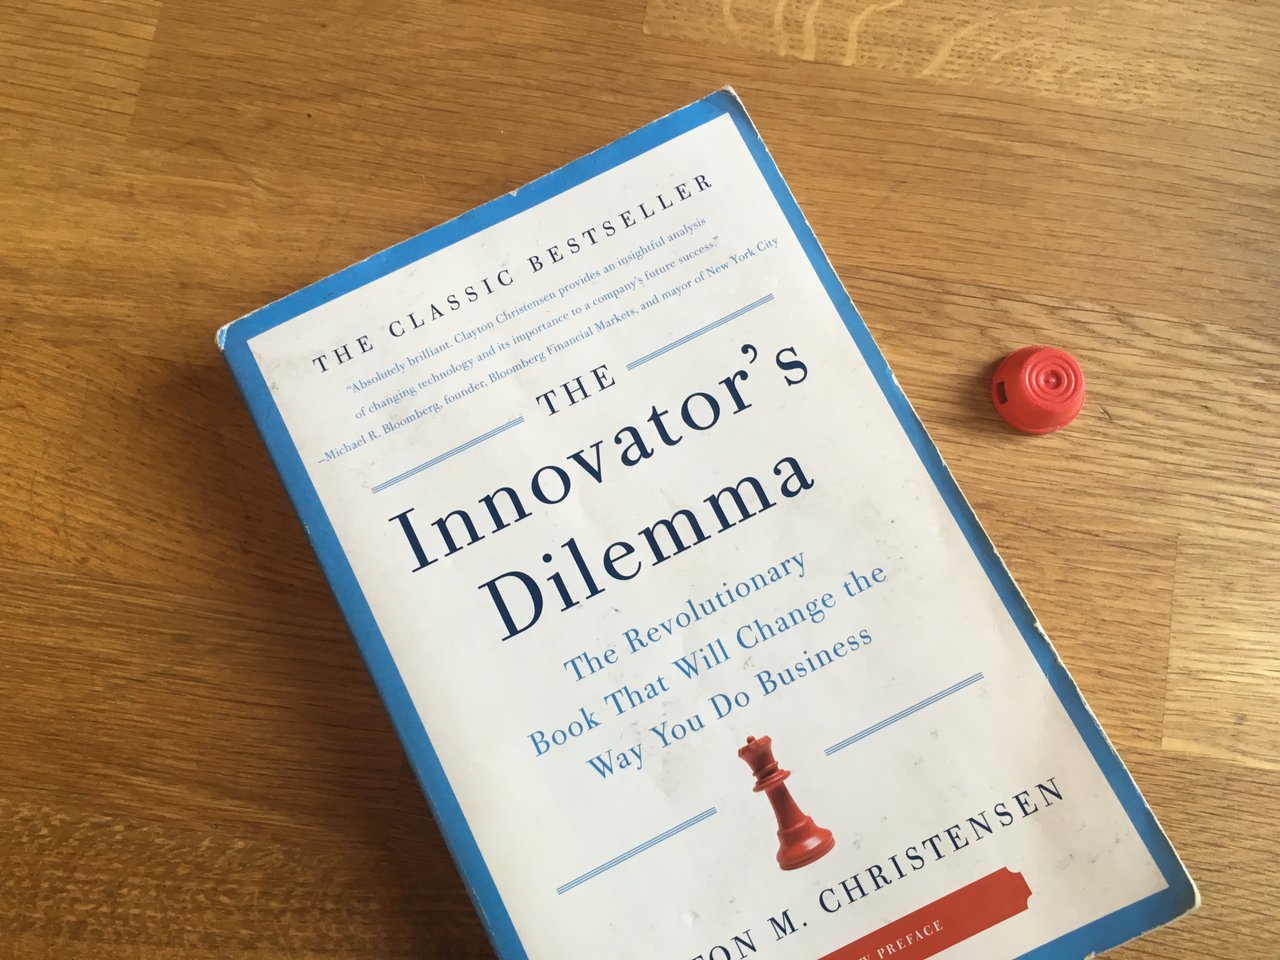 The Innovator's Dilemma: How Can You Loose When You Seem to Be Winning?